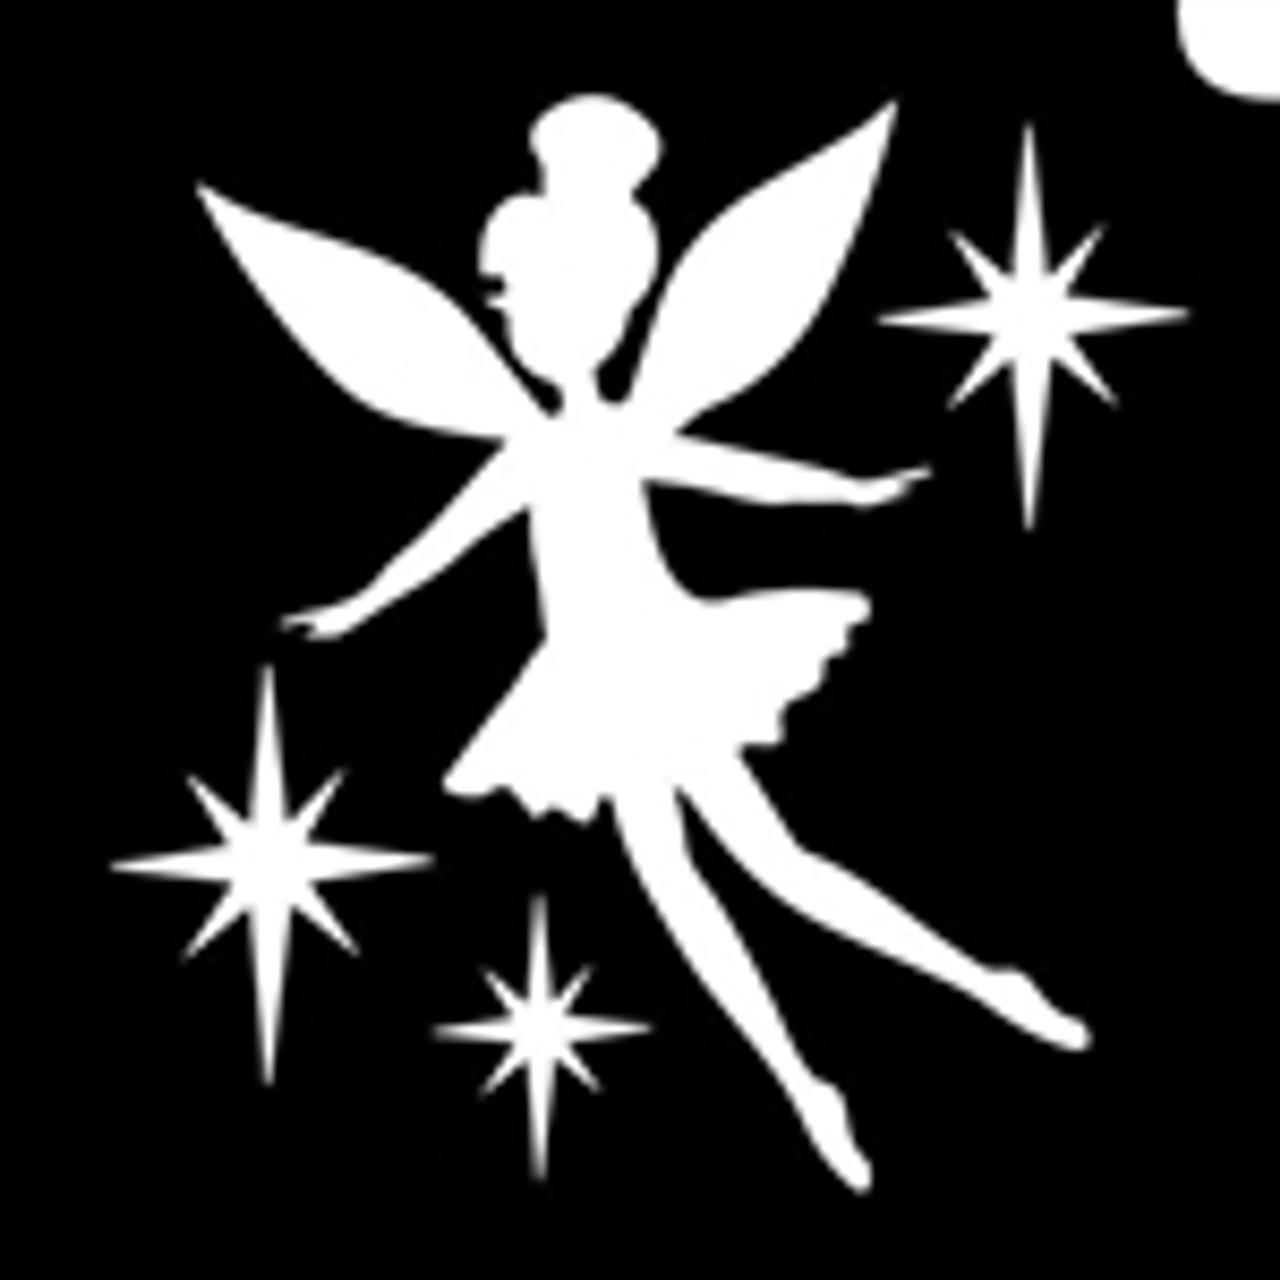 Whimsical Fairy 3 Layer Stencil 5 pack